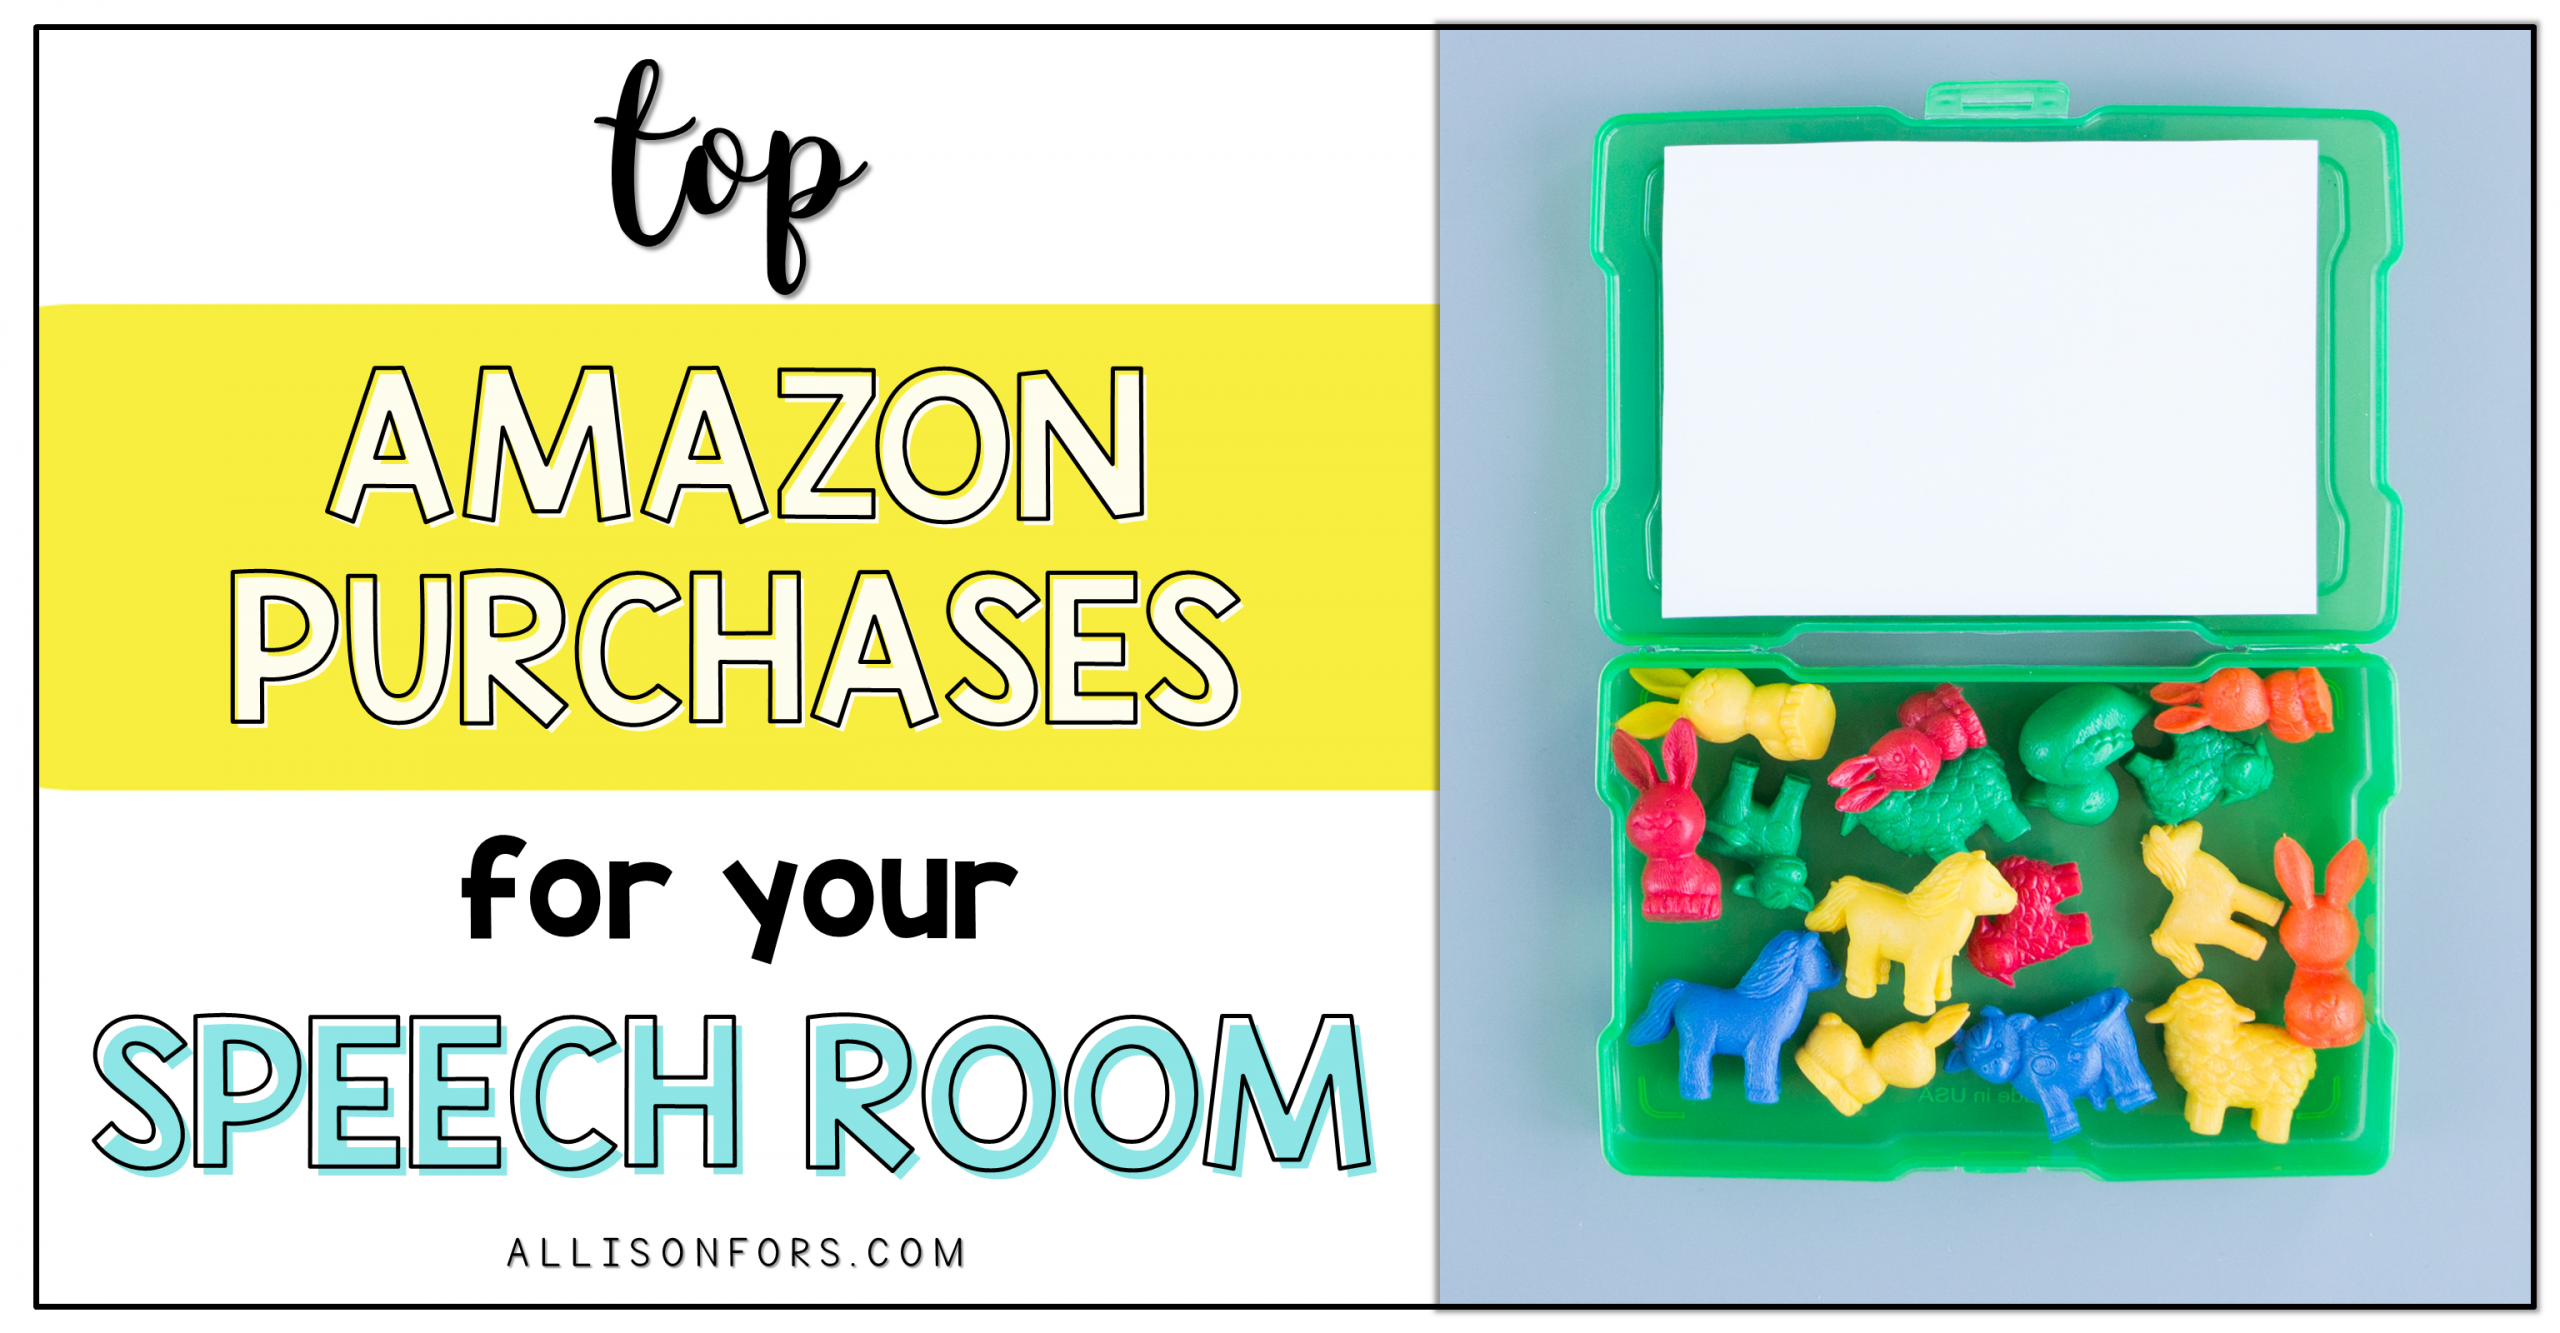 Top Amazon Purchases for Your Speech Room